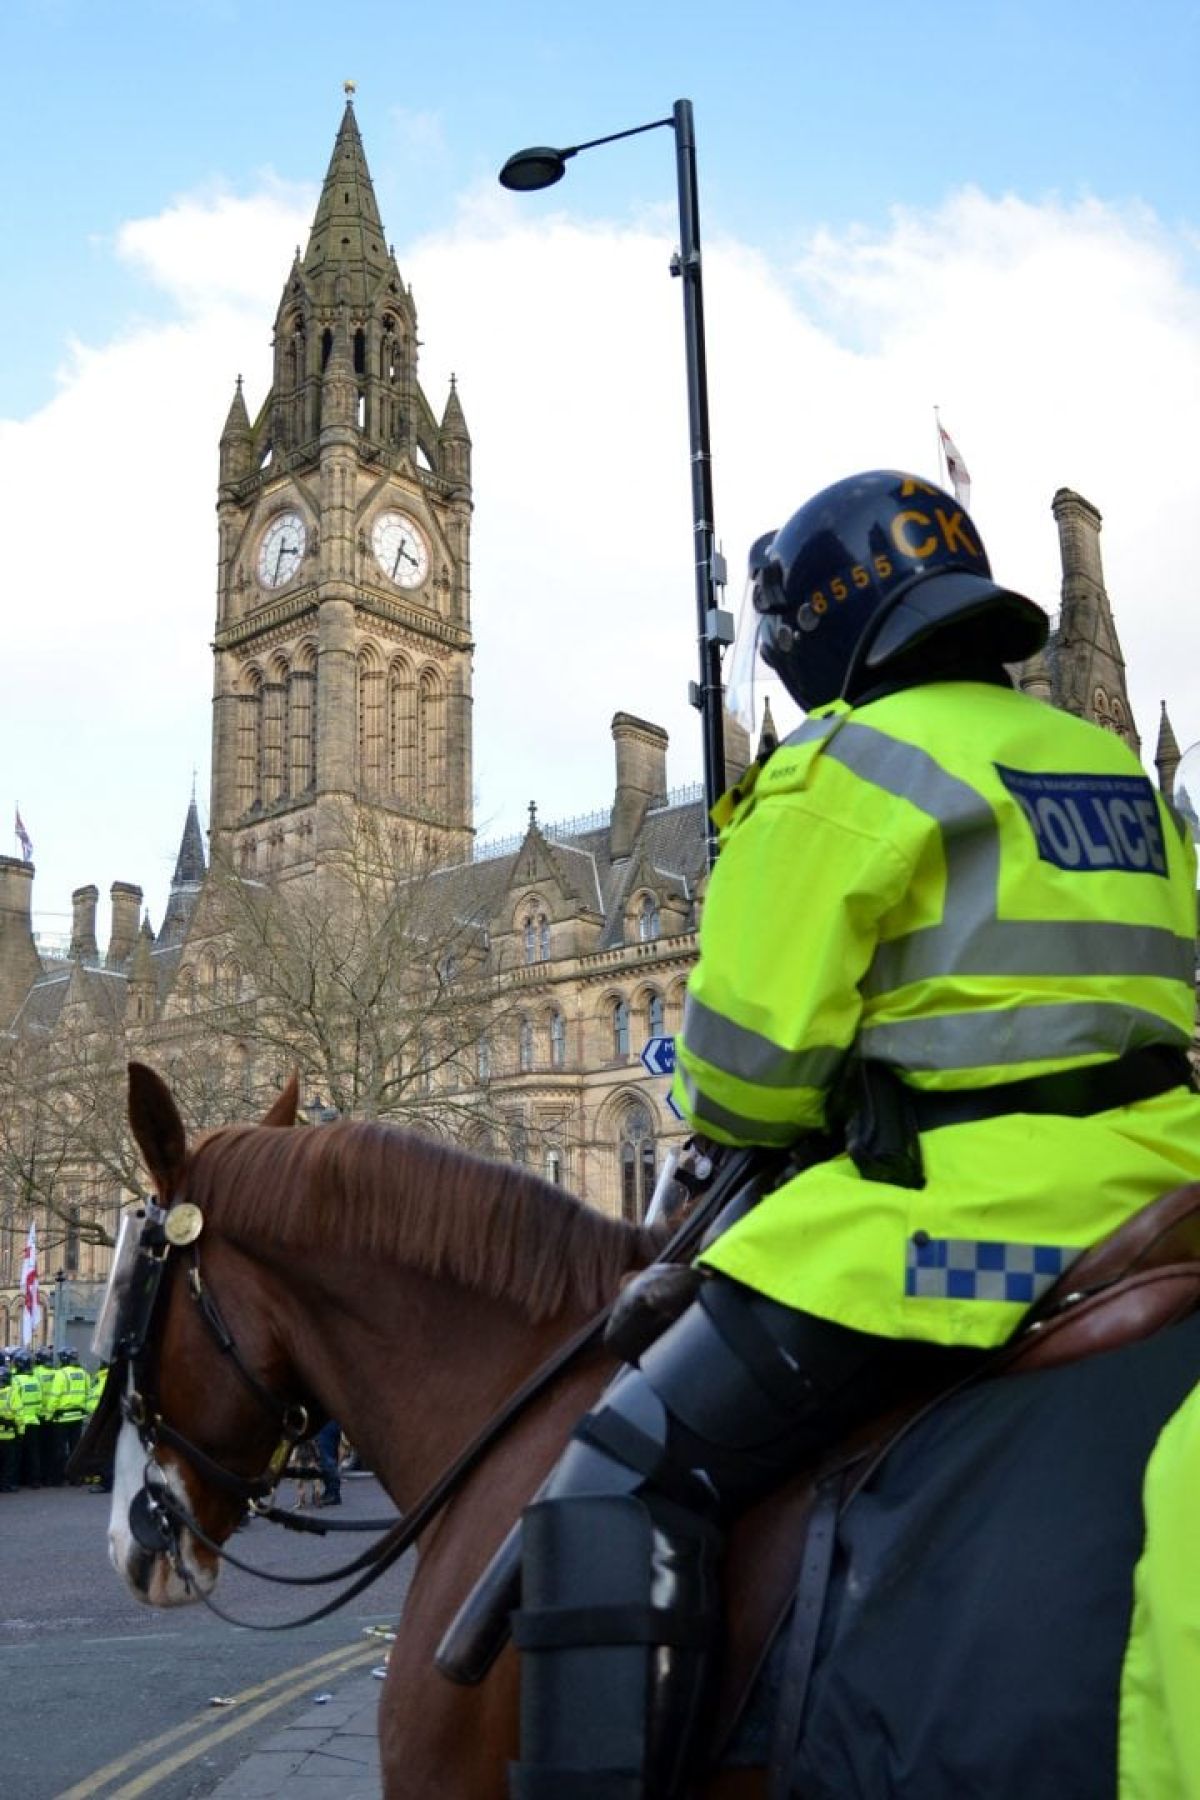 GMP appeal for information following ear attack